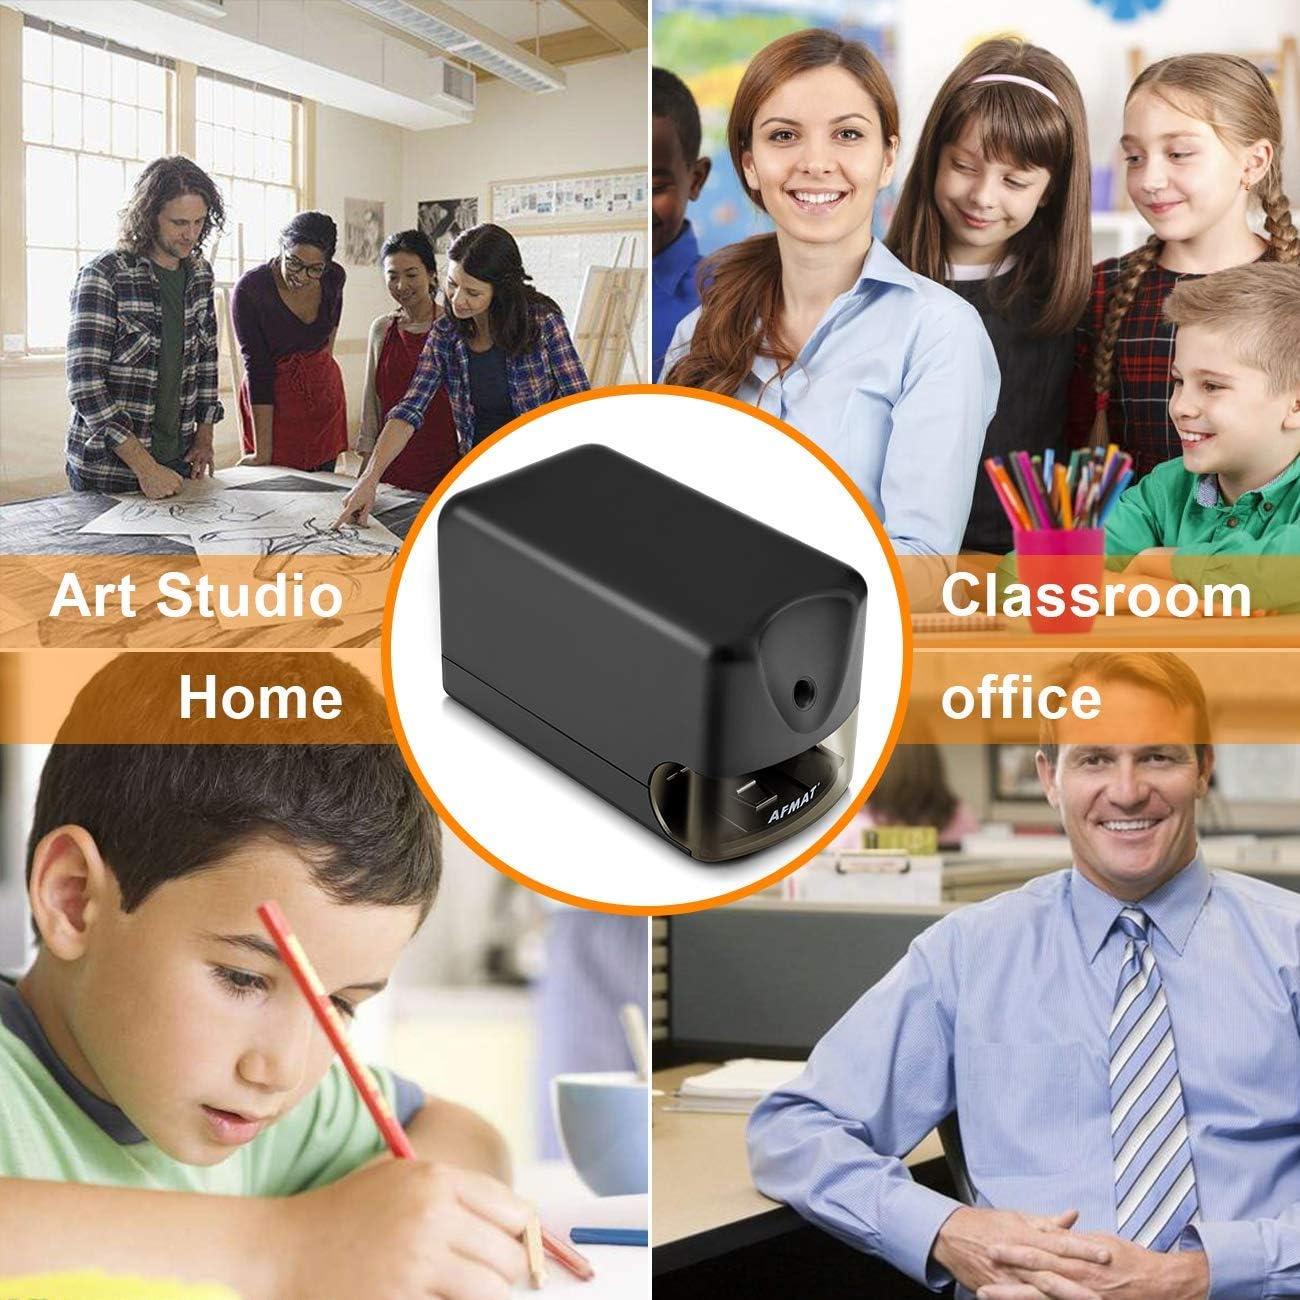 AFMAT Electric Pencil Sharpener - Portable Fast Pencil Sharpener for Kids -  Dual Power Colored Pencil Sharpener (Plug in or Battery Operated), Ideal